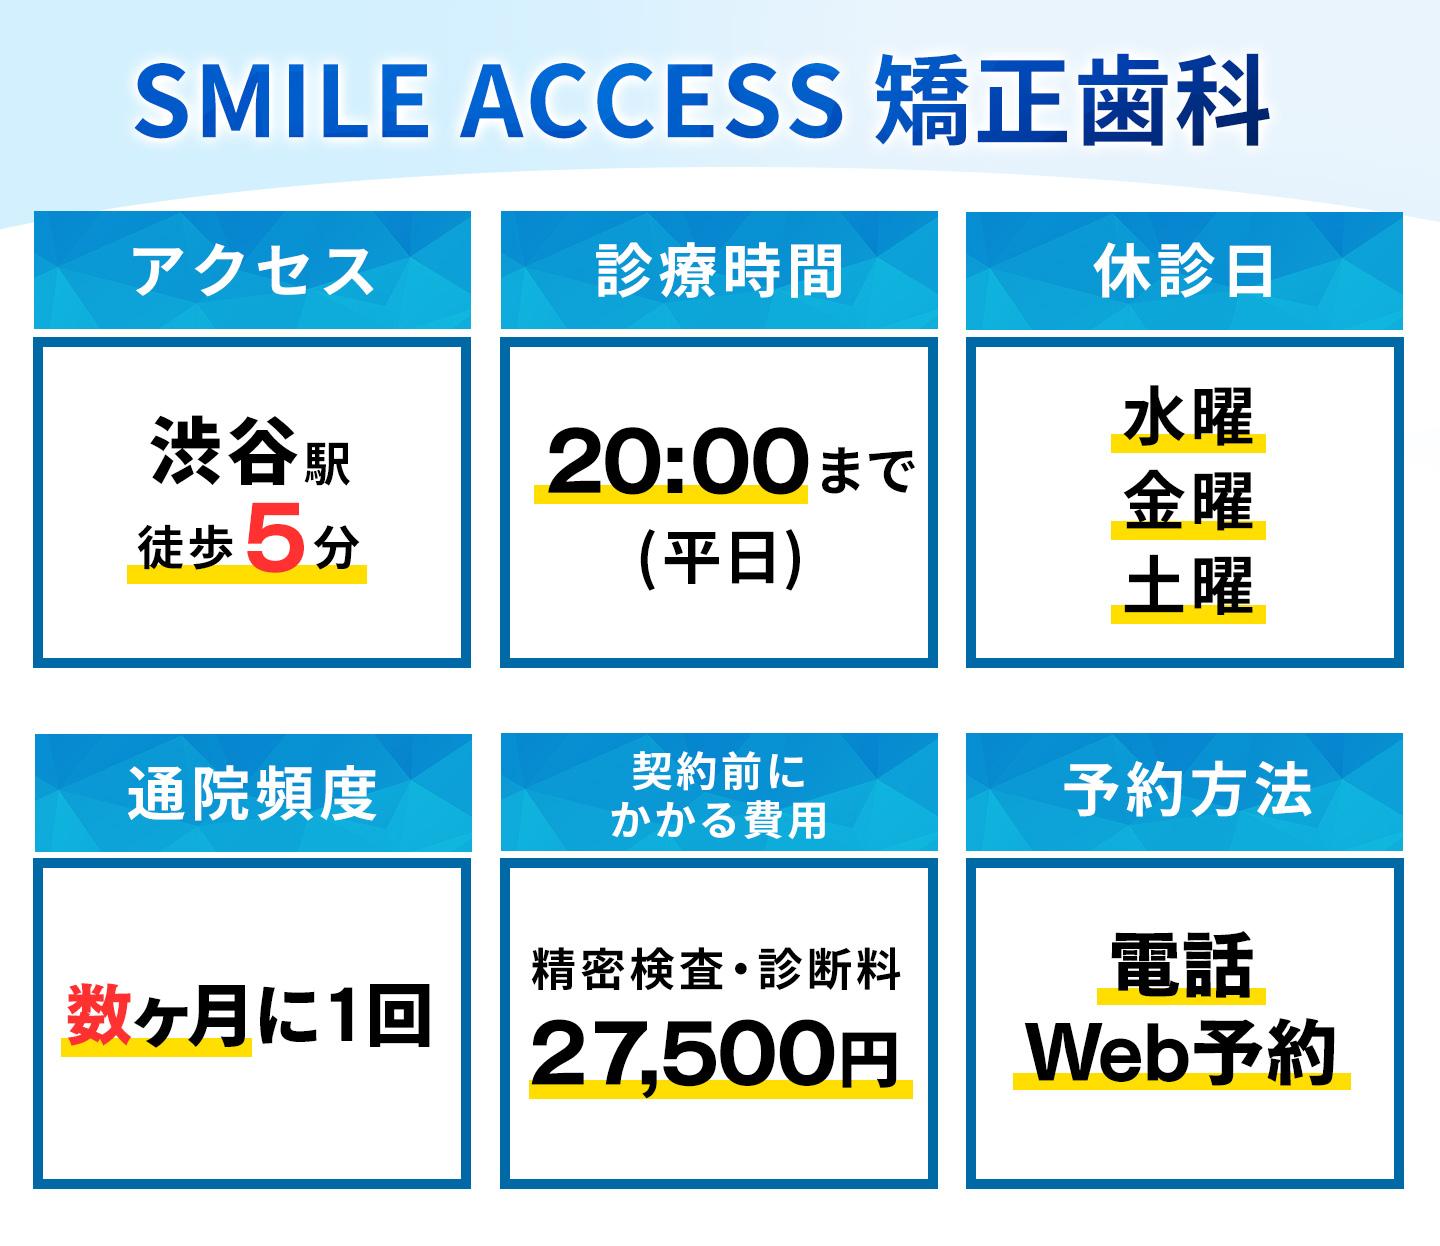 SMILE ACCESS 矯正歯科の基本情報